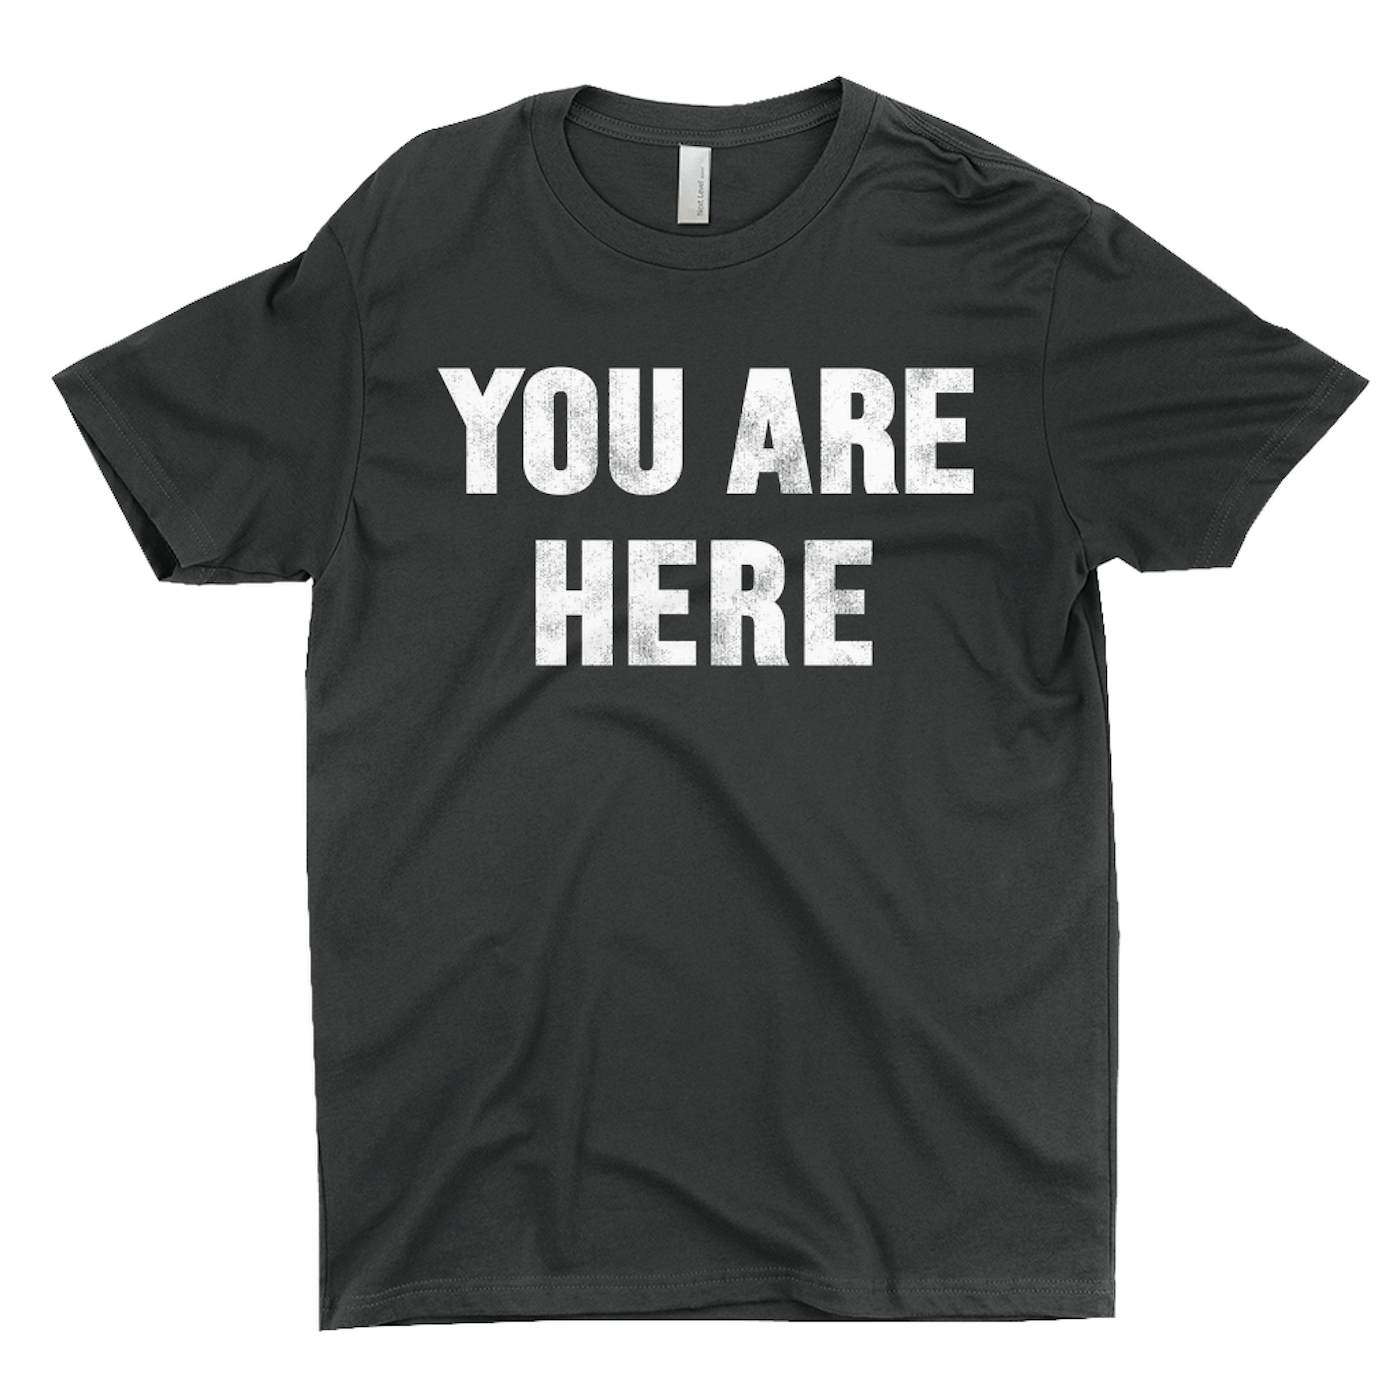 John Lennon T-Shirt | You Are Here Distressed Design Worn By John Lennon John Lennon Shirt